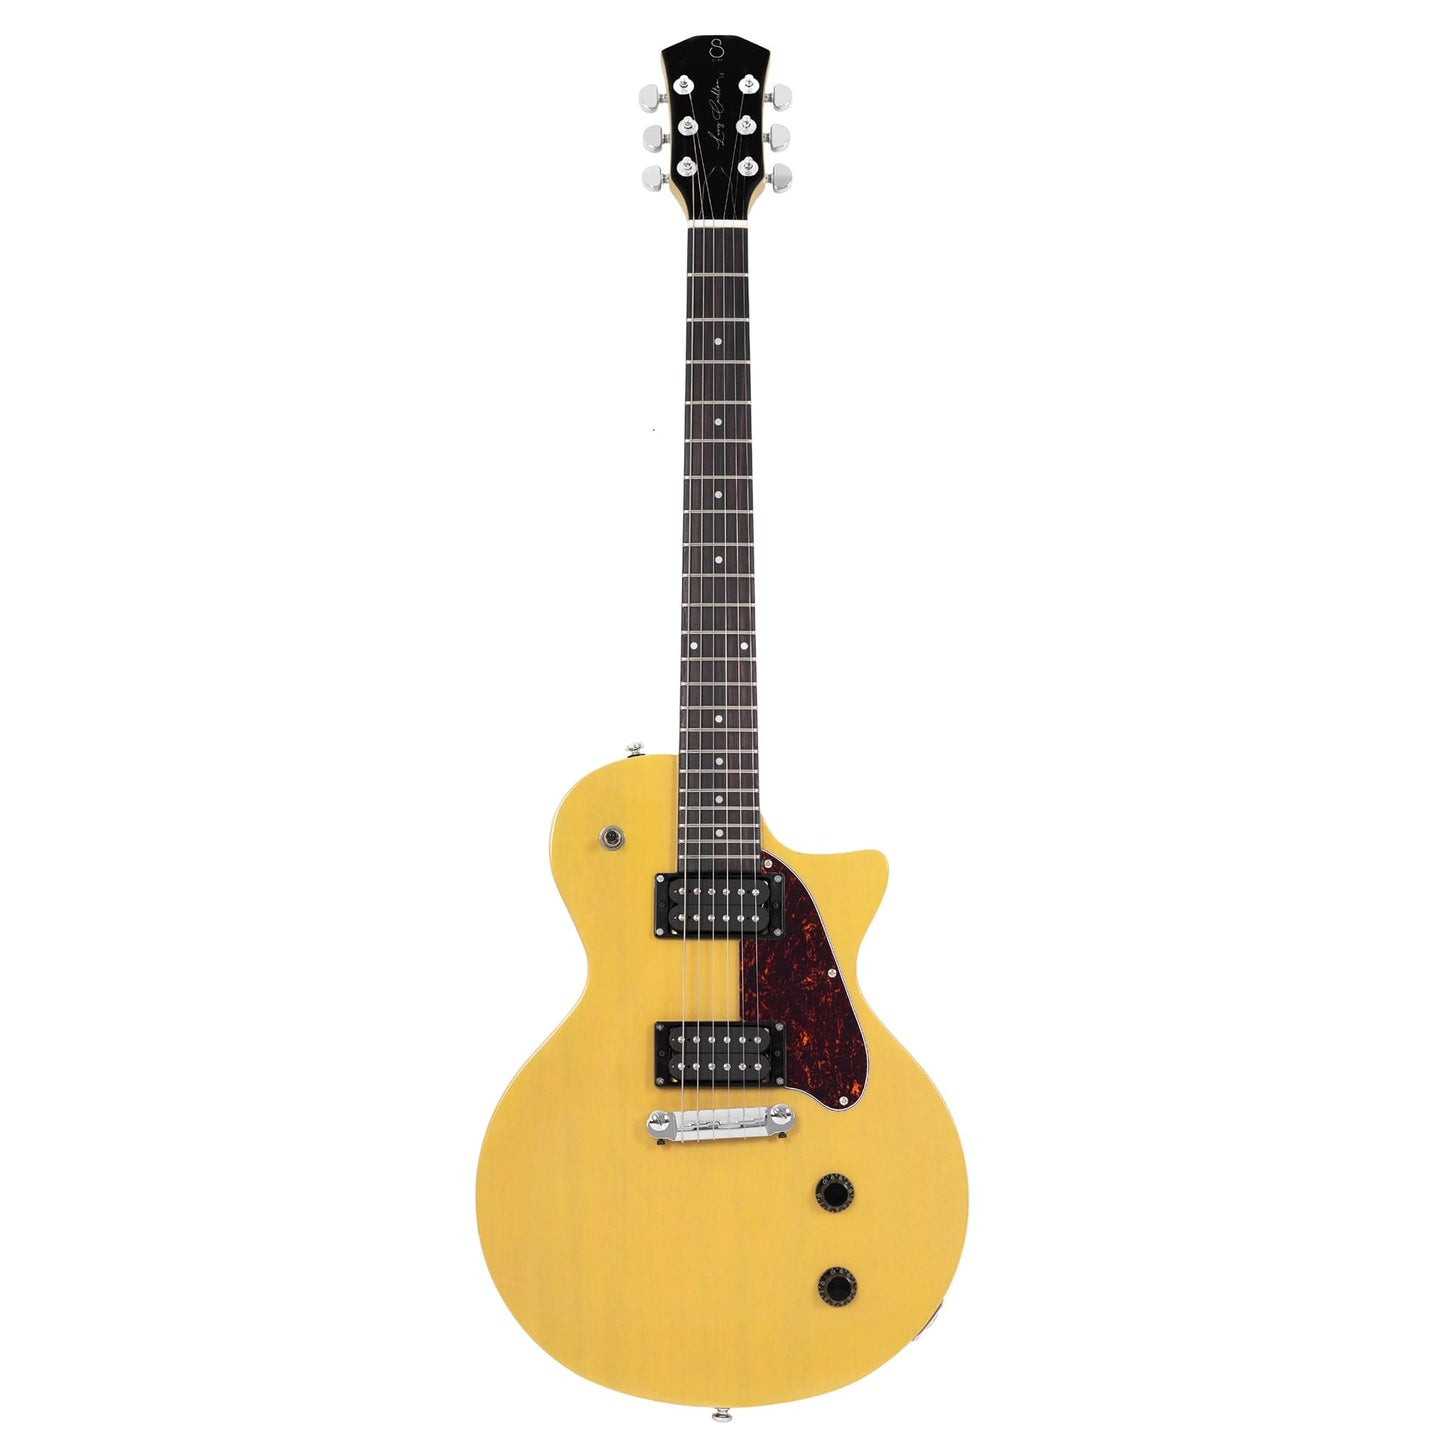 Sire Larry Carlton L3 HH TV Yellow Electric Guitars / Solid Body